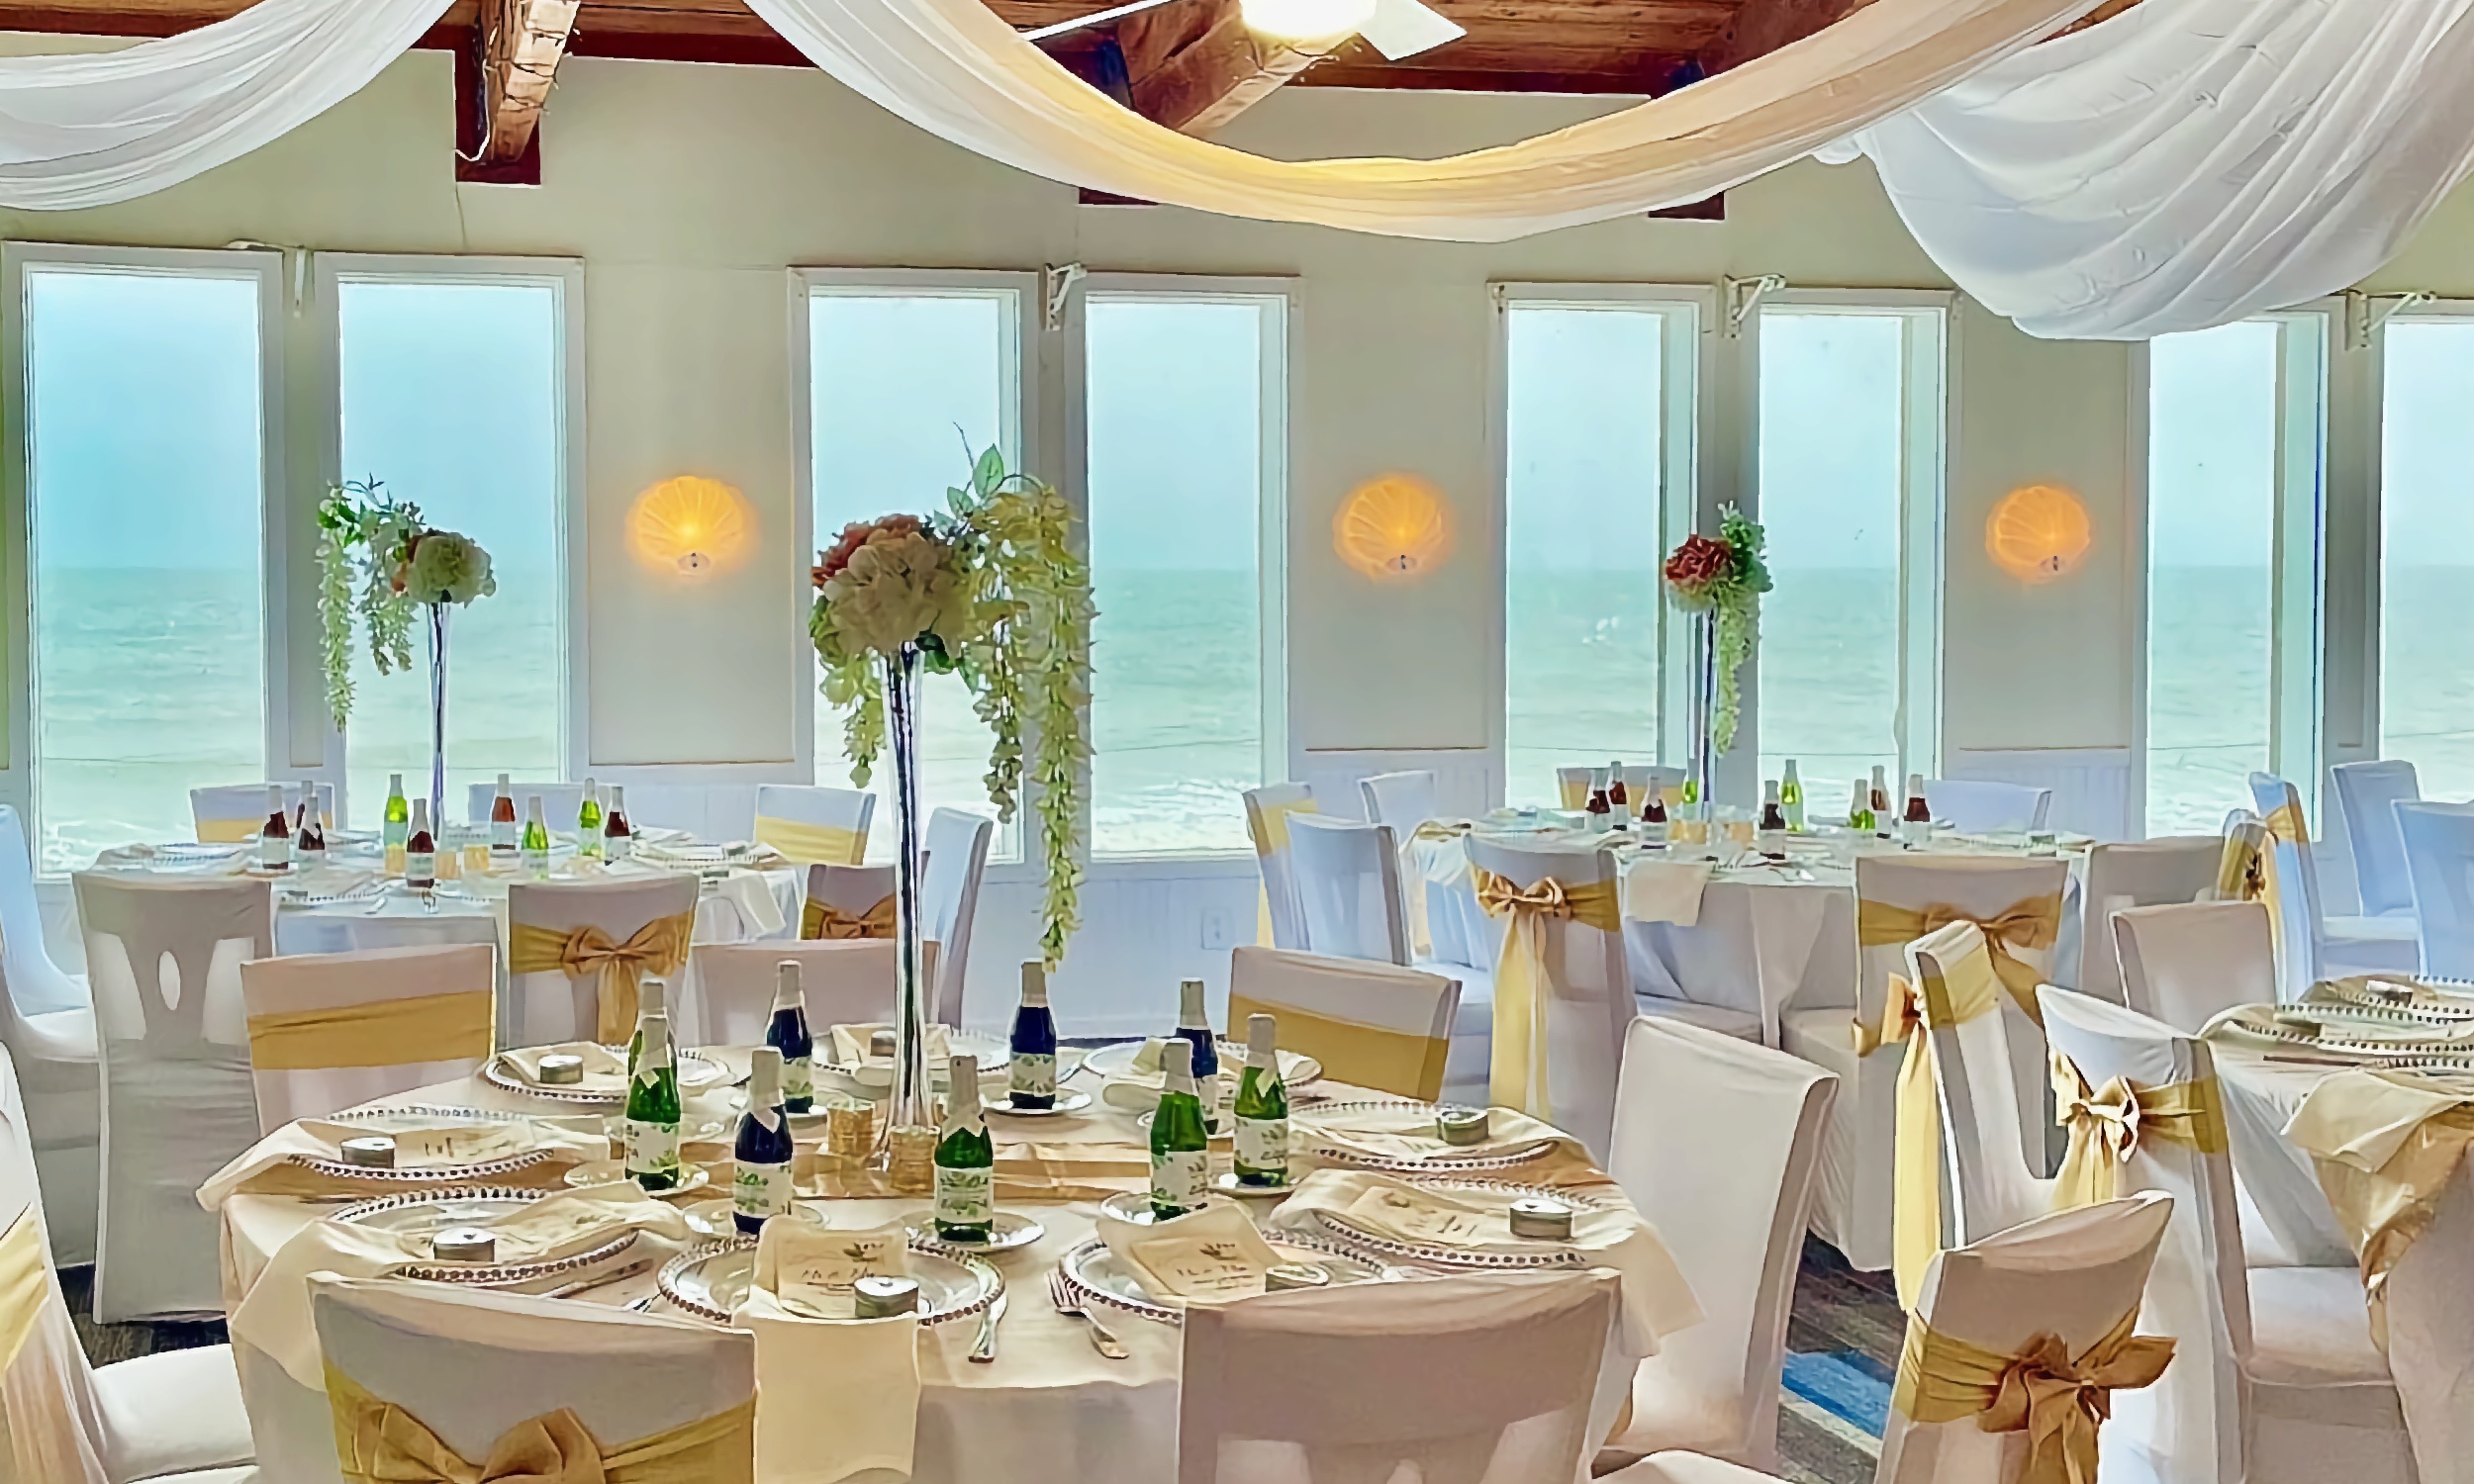 The banquet room at the Reef Restaurant seats 75, here it is set up for a lovely wedding with white draping